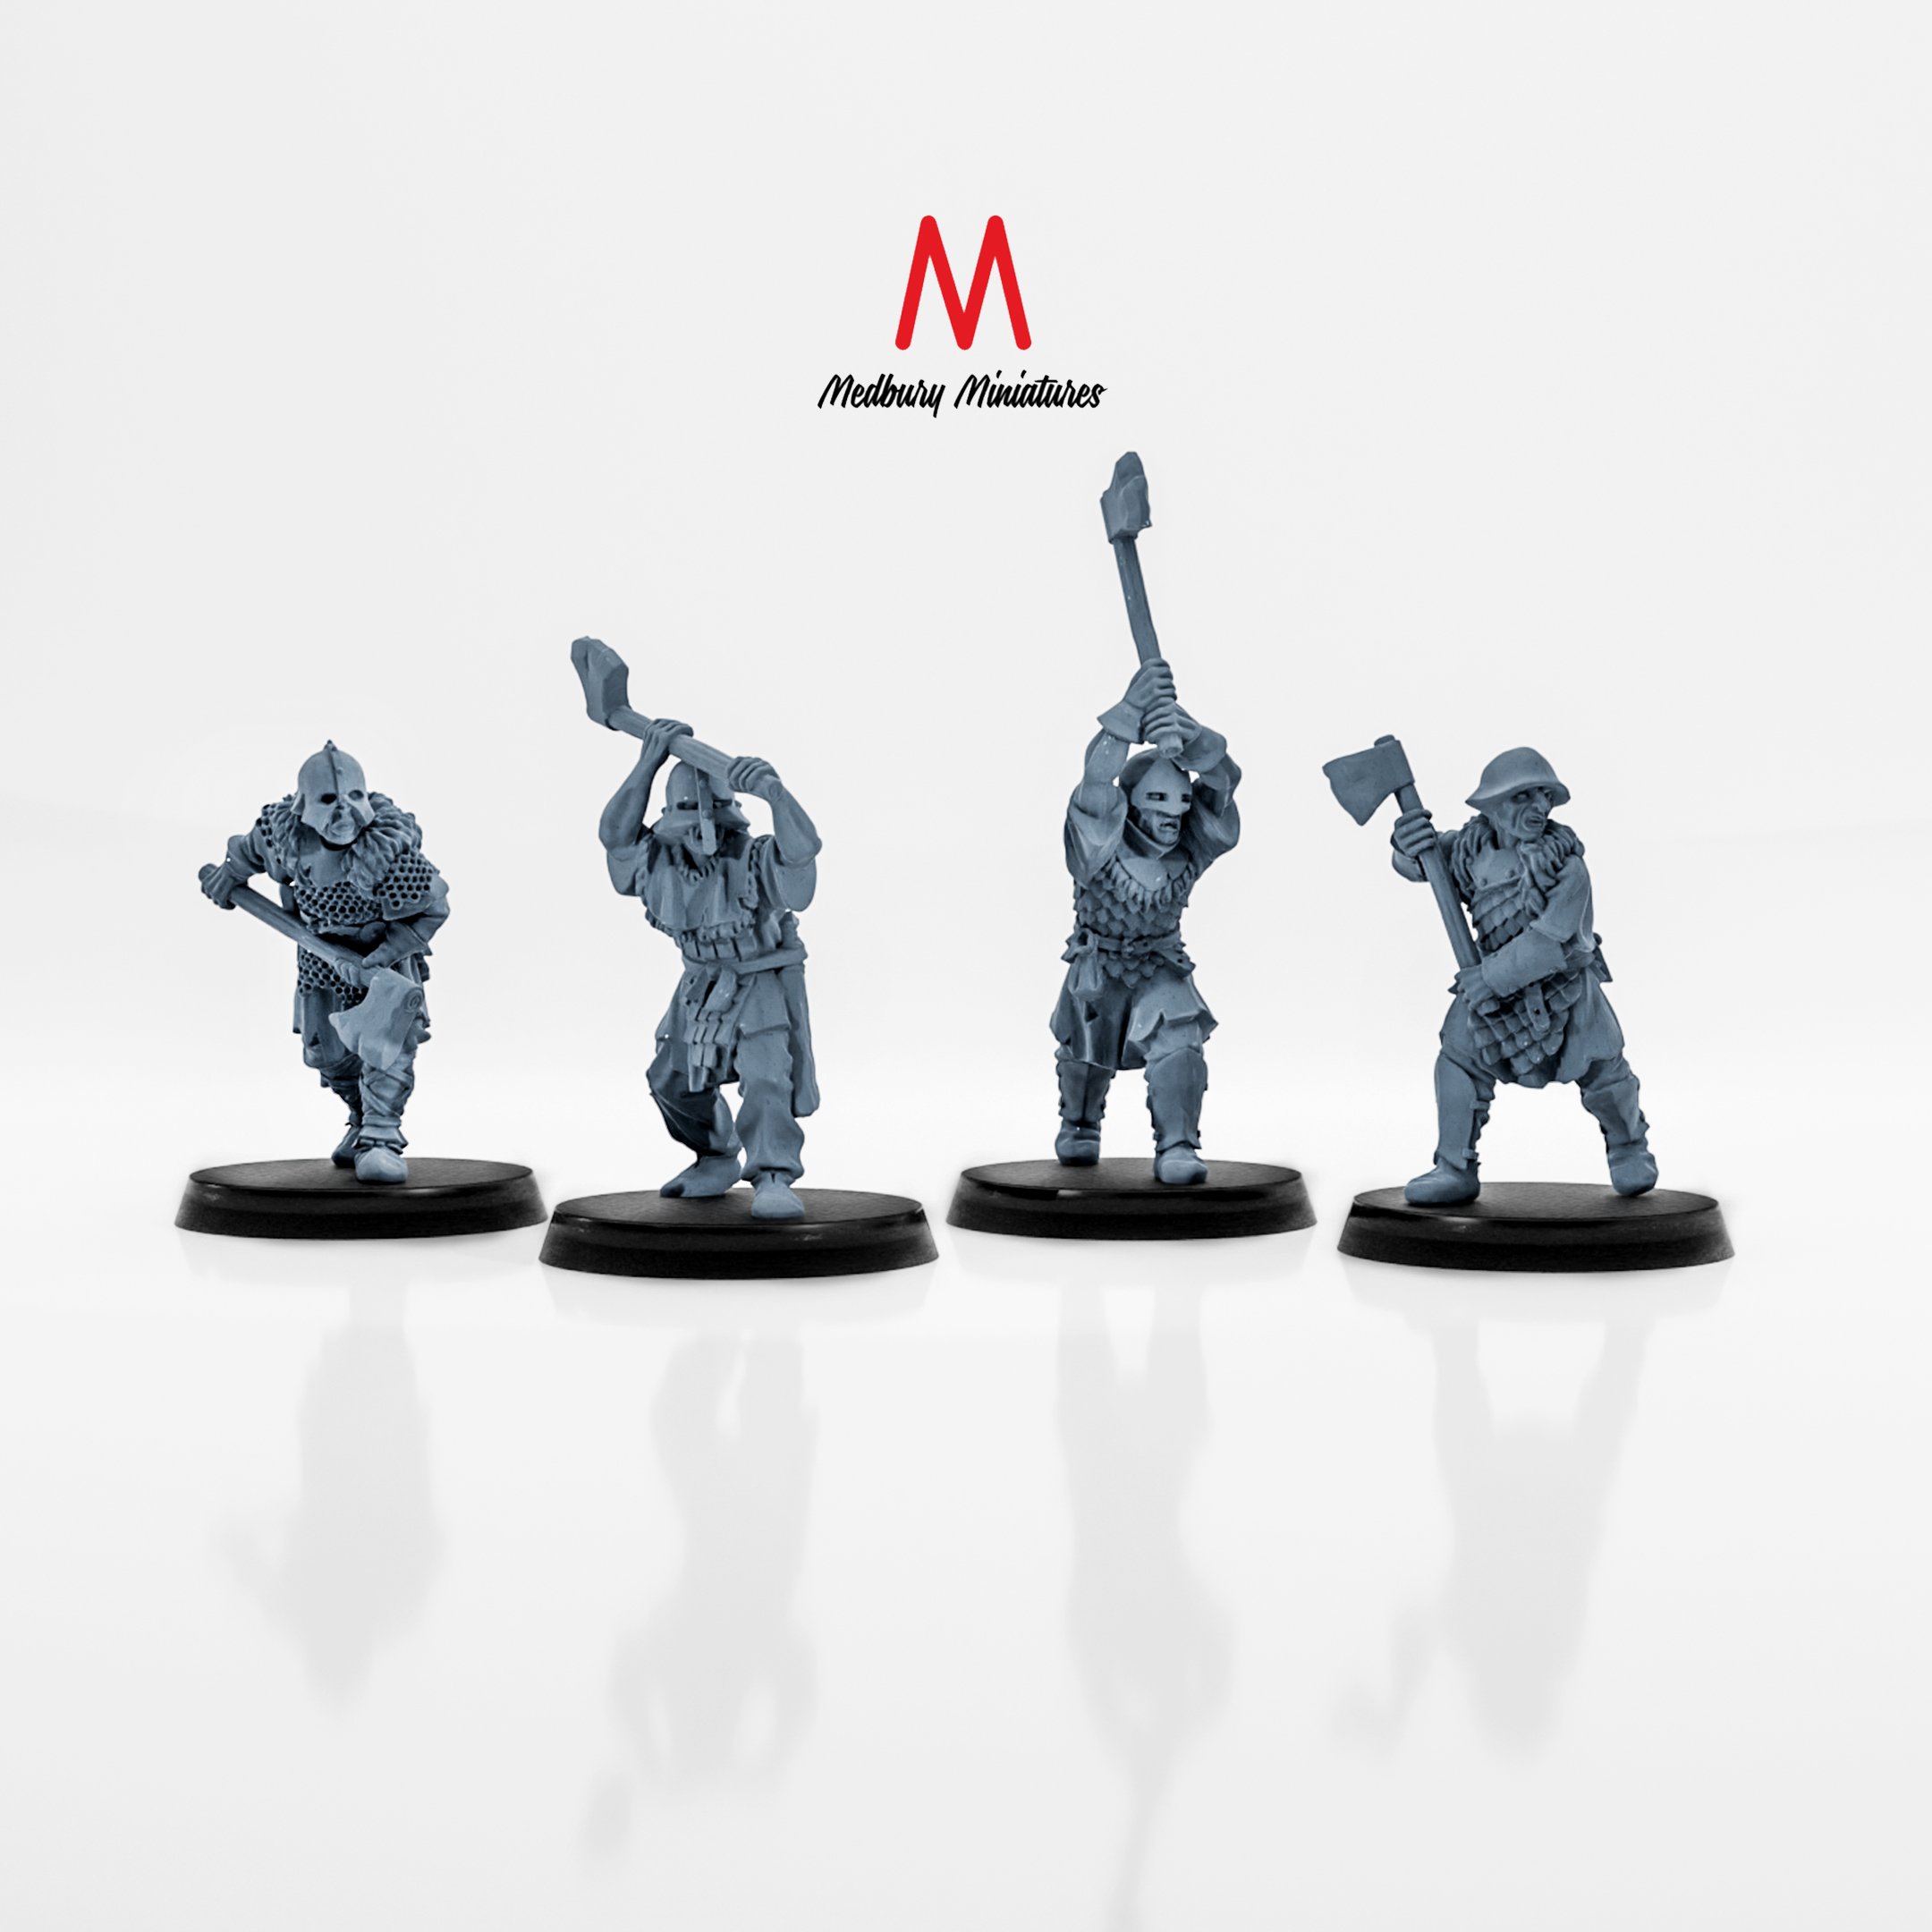 Orcs with Two-handed Axes fantasy skirmish wargaming miniatures designed by Medbury Miniatures 3D printed by Forgemaster Miniatures